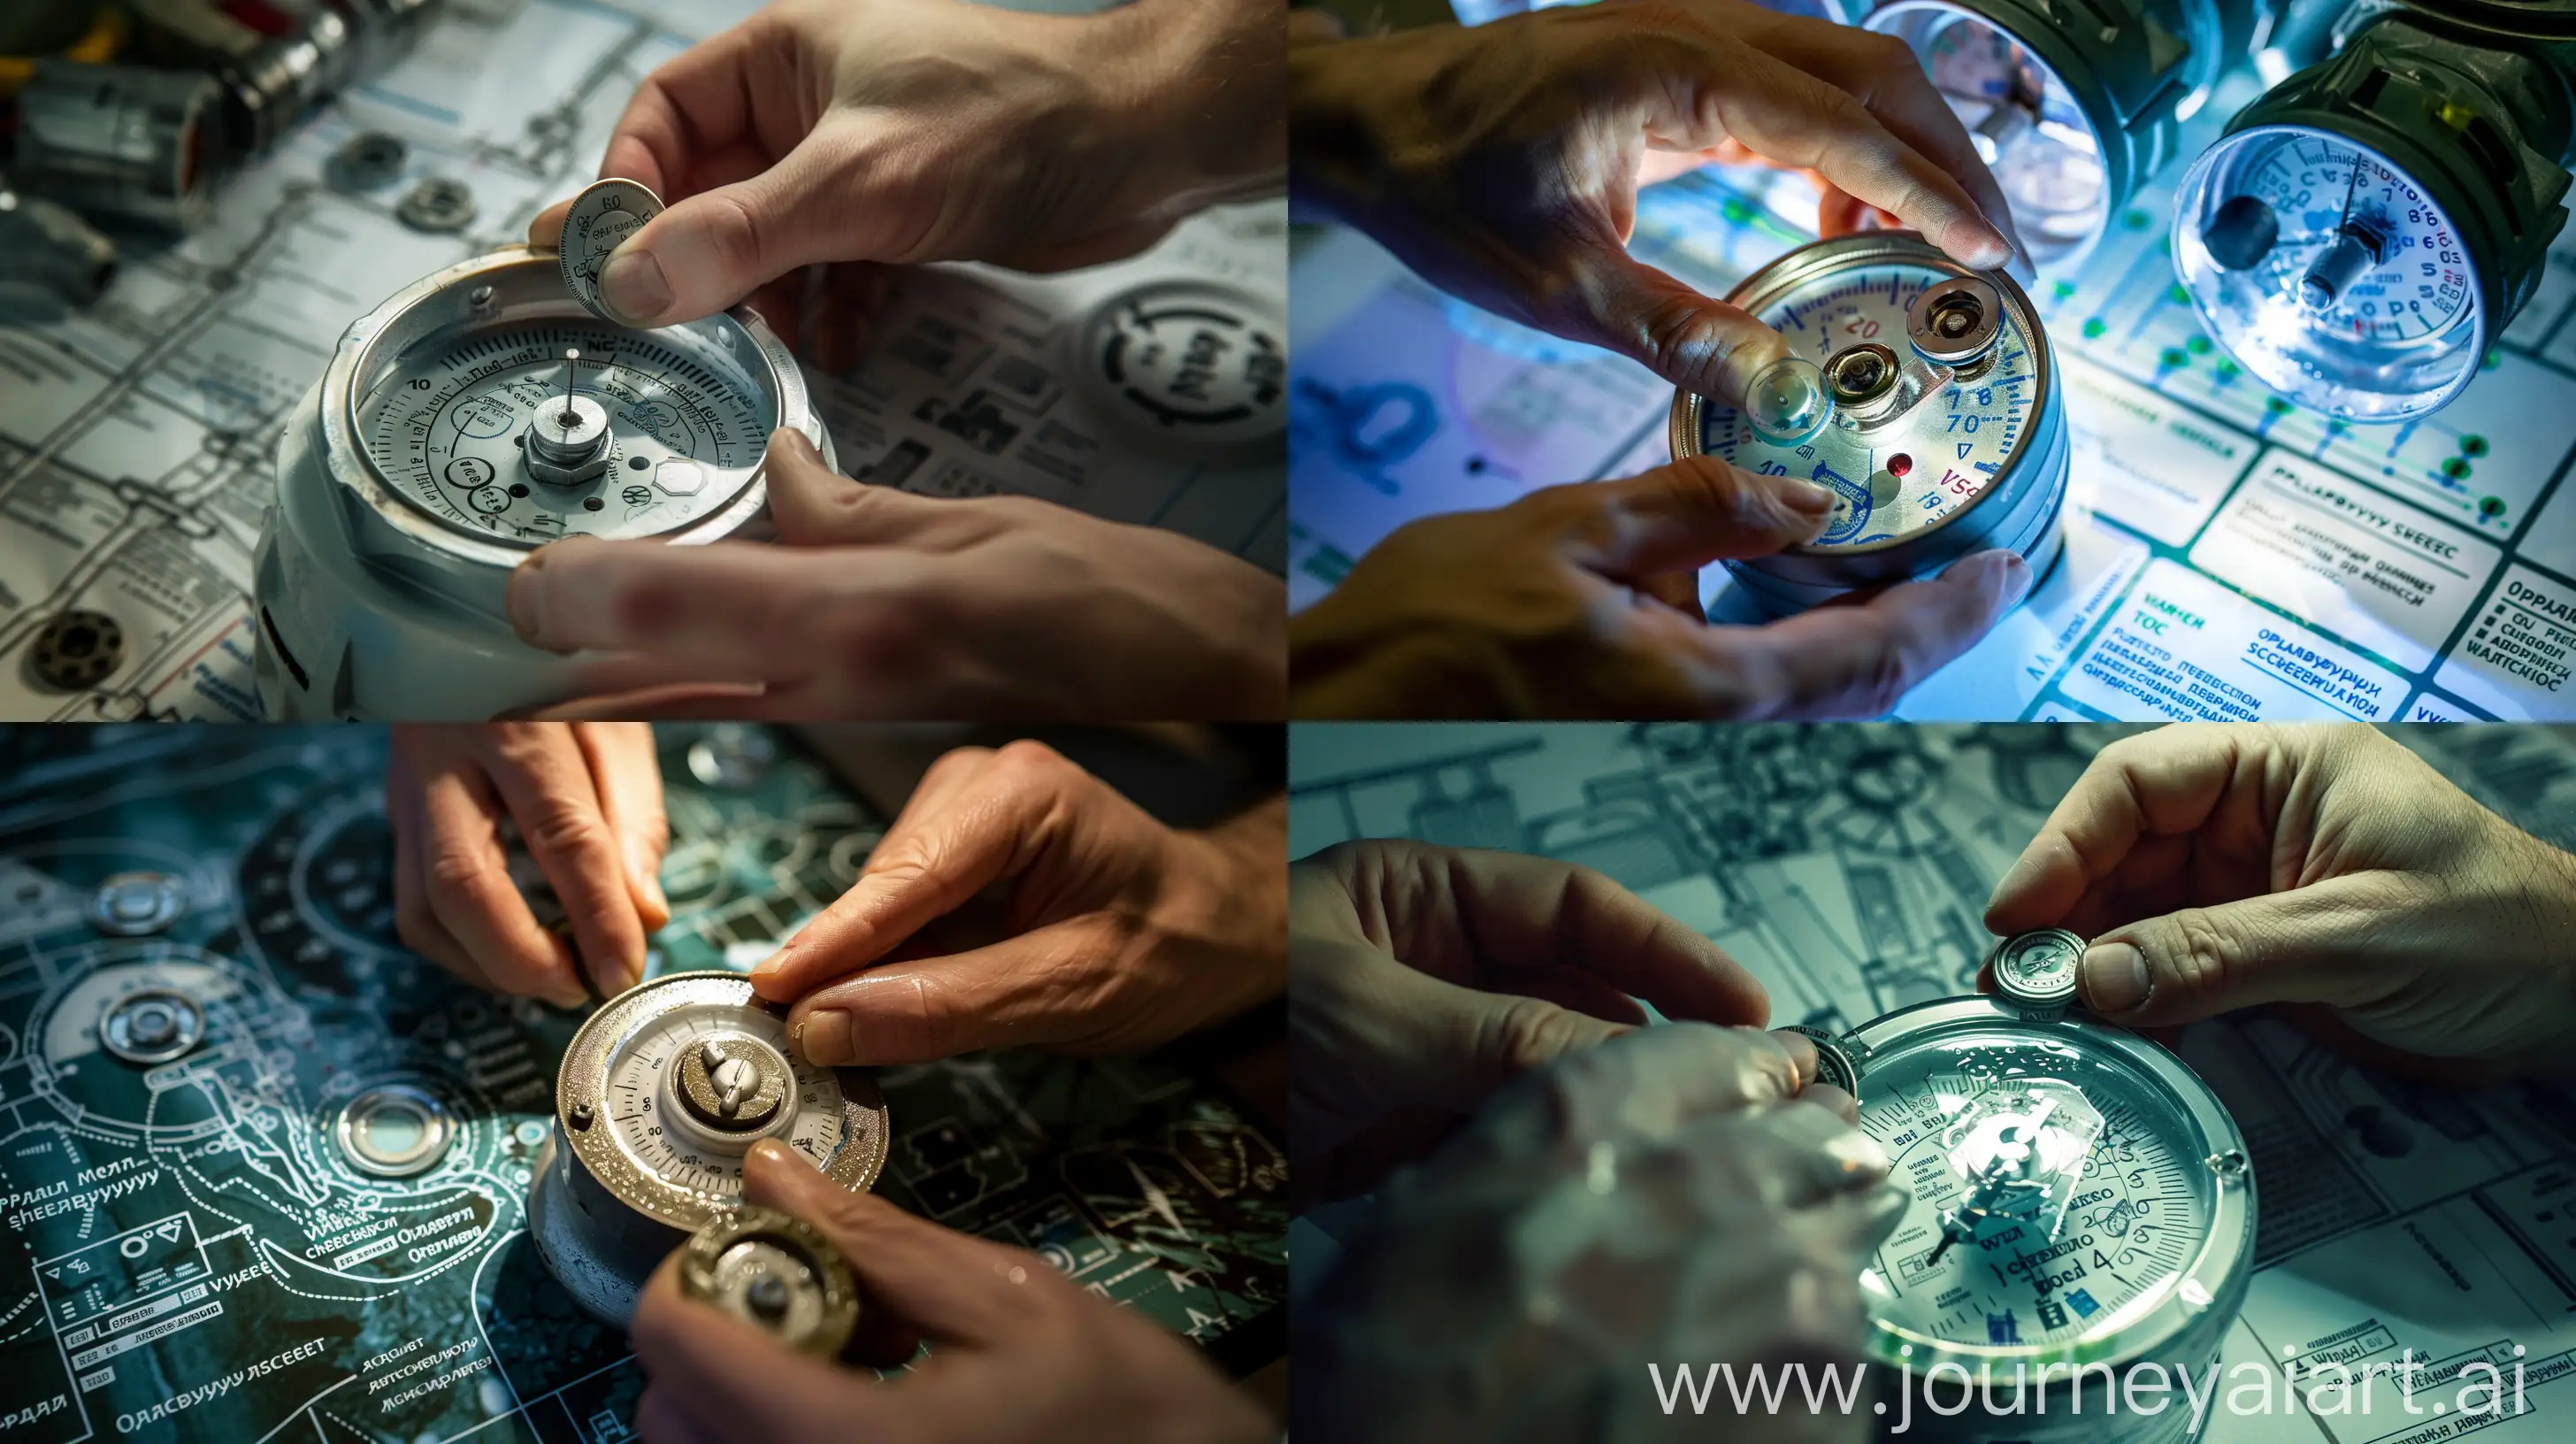 A close-up photograph capturing the process of sealing water meters, known as опломбировка счетчиков воды, against a backdrop detailing the essentials of water meter sealing. Skilled hands delicately apply seals to the meter, showcasing the meticulousness of the process. The seals, bearing unique markings, are carefully affixed to ensure accuracy and security. Bright lighting highlights the intricate details of the seals and the meter, emphasizing their significance. The composition juxtaposes the technical aspects of sealing with informative visuals, providing clarity on the purpose and procedure of water meter sealing.  --ar 16:9 